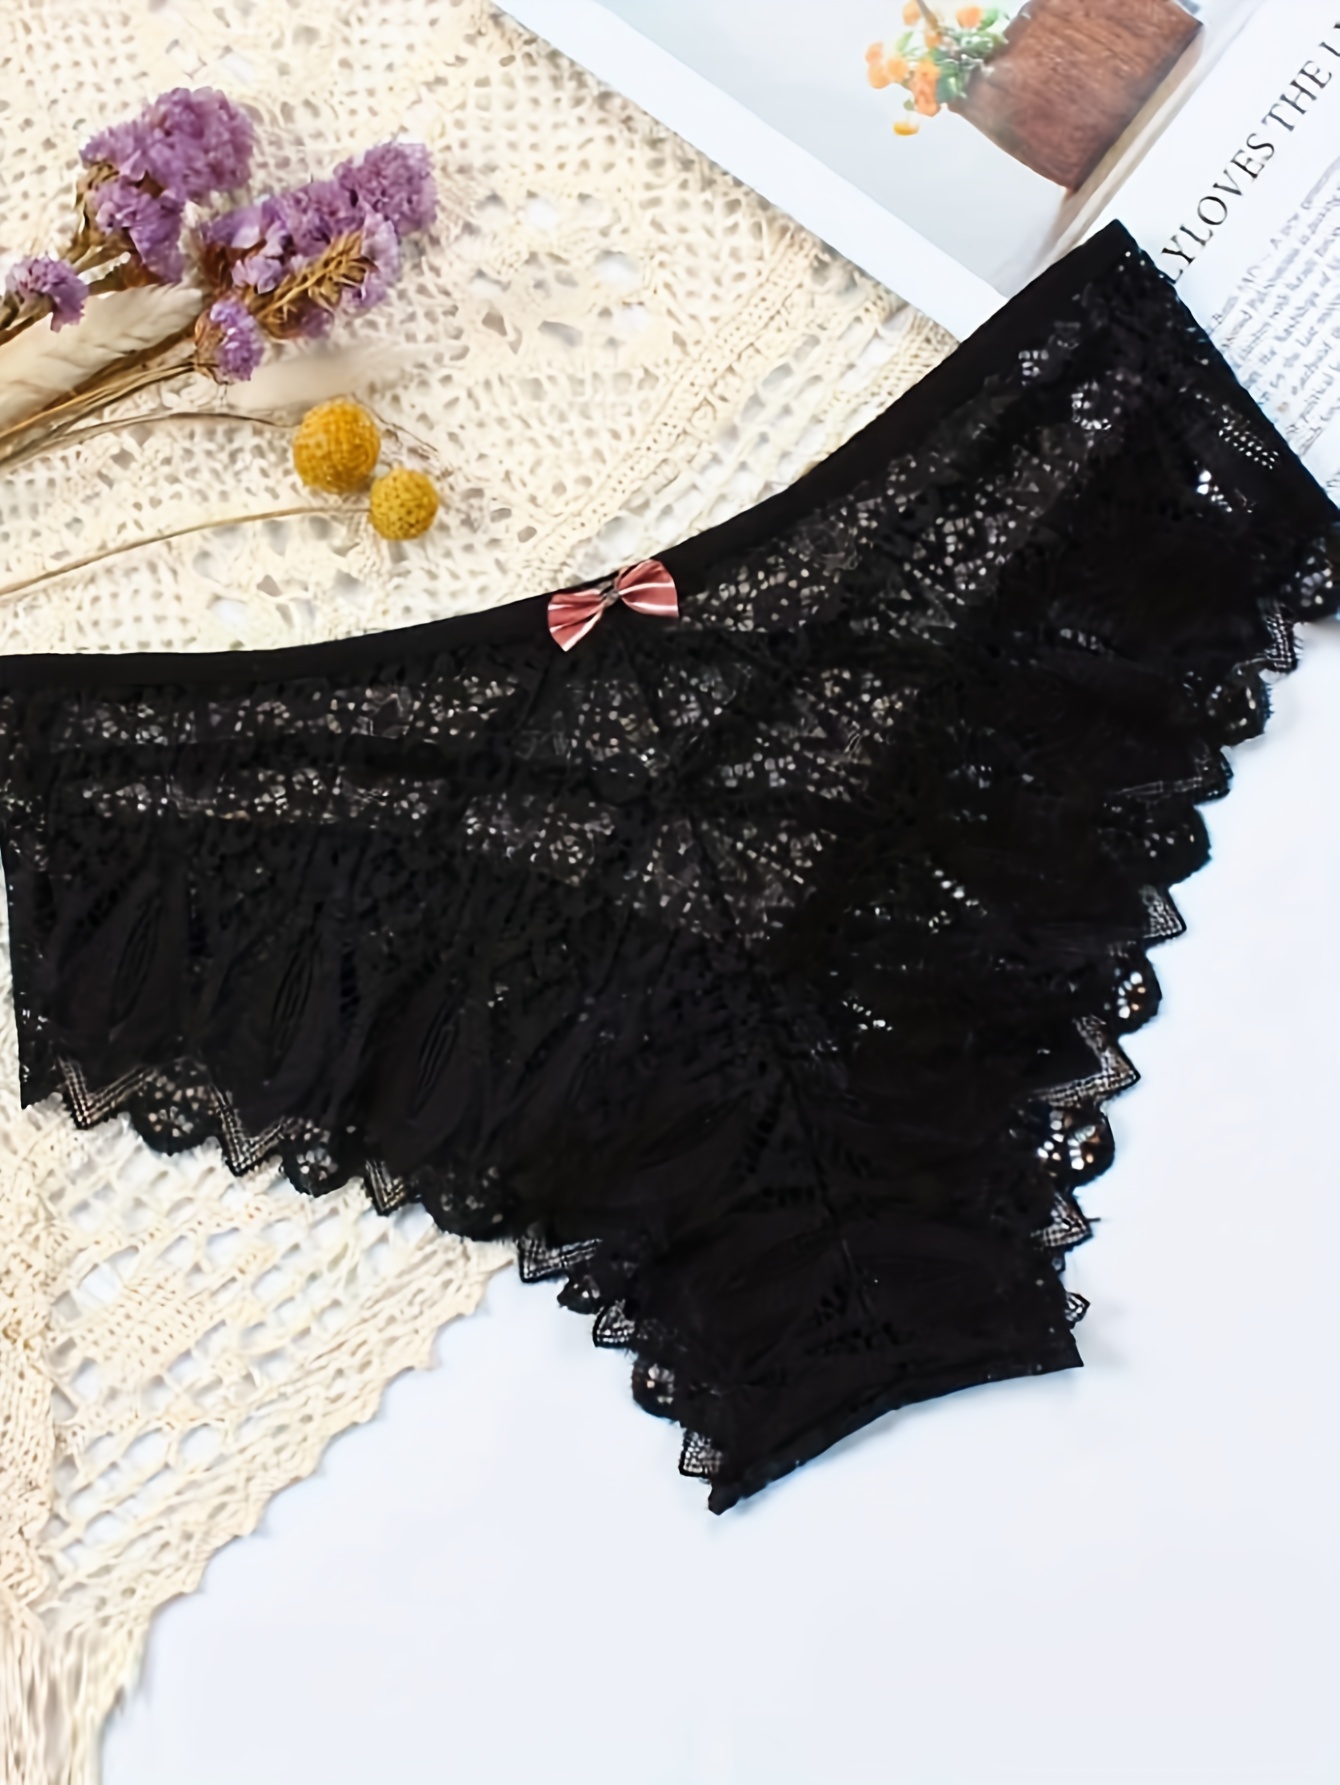 Black Cotton Hipster Underwear with Lace Trim for Women